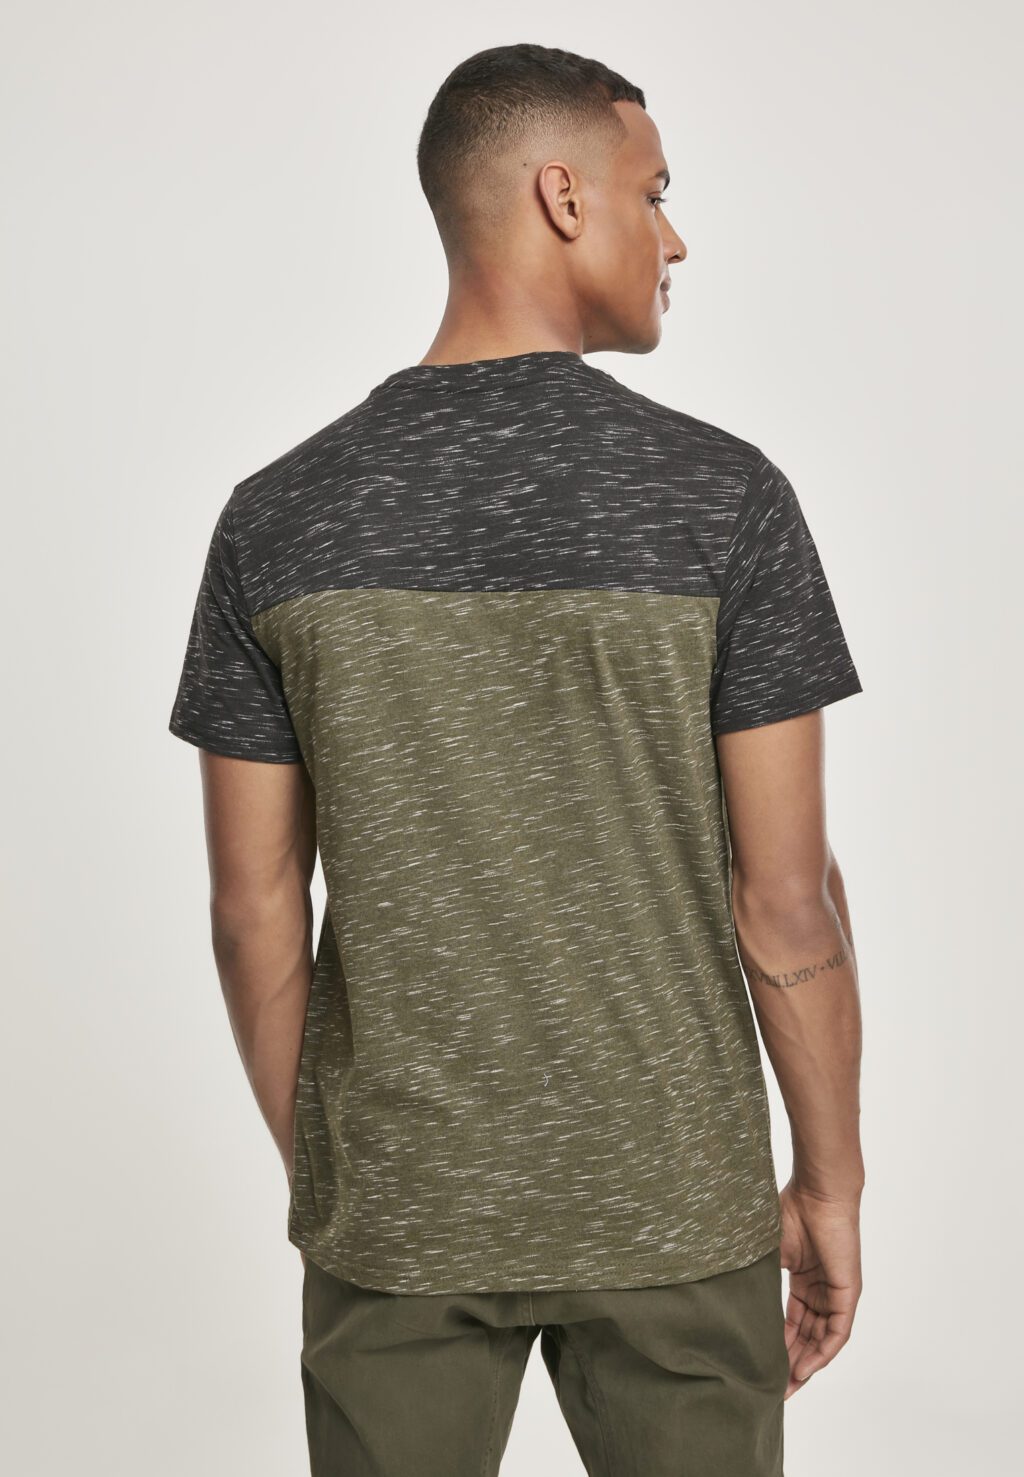 Color Block Tech Tee marled olive SP1411